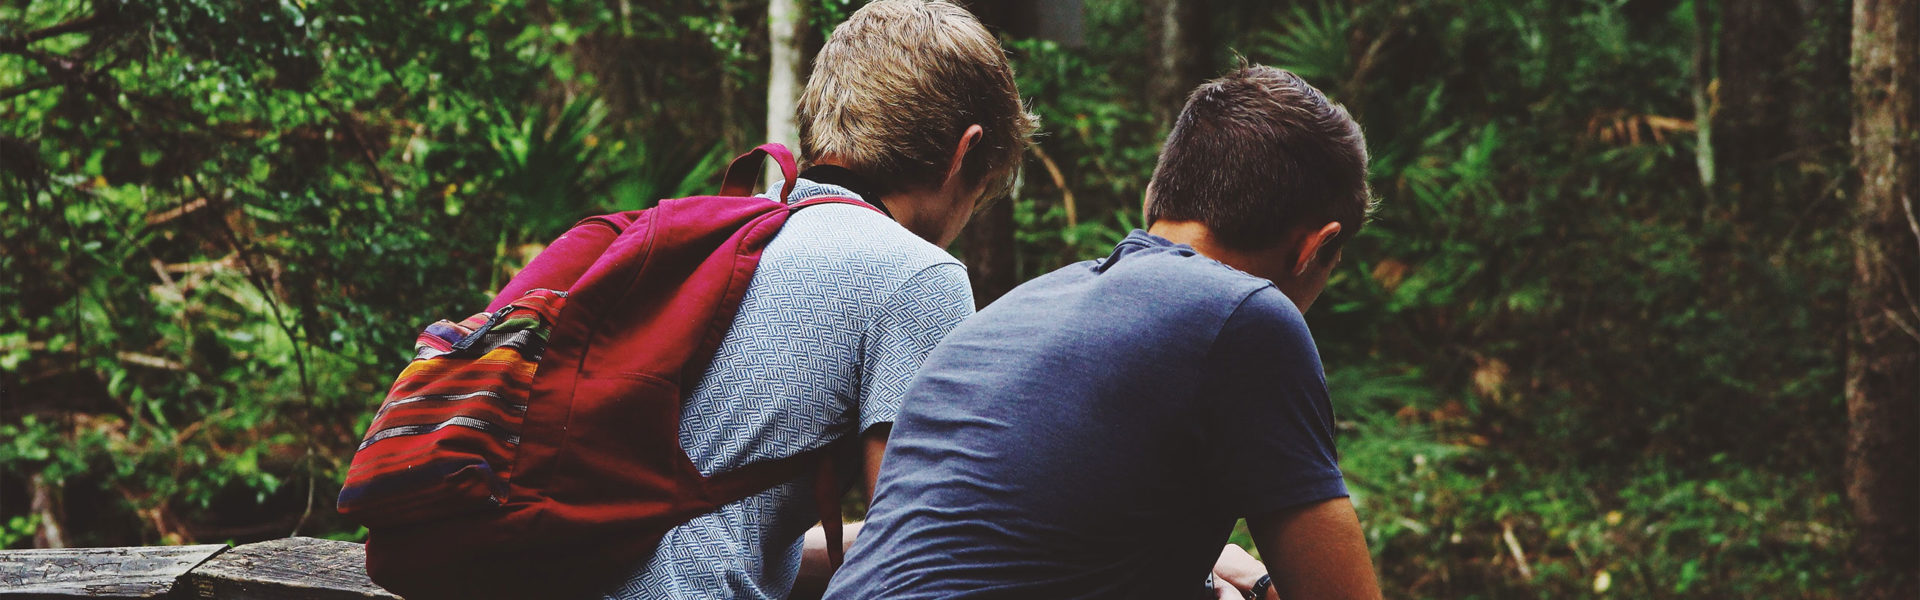 Internet Safety for Kids Two Teen Boys In The Woods Looking At Phones